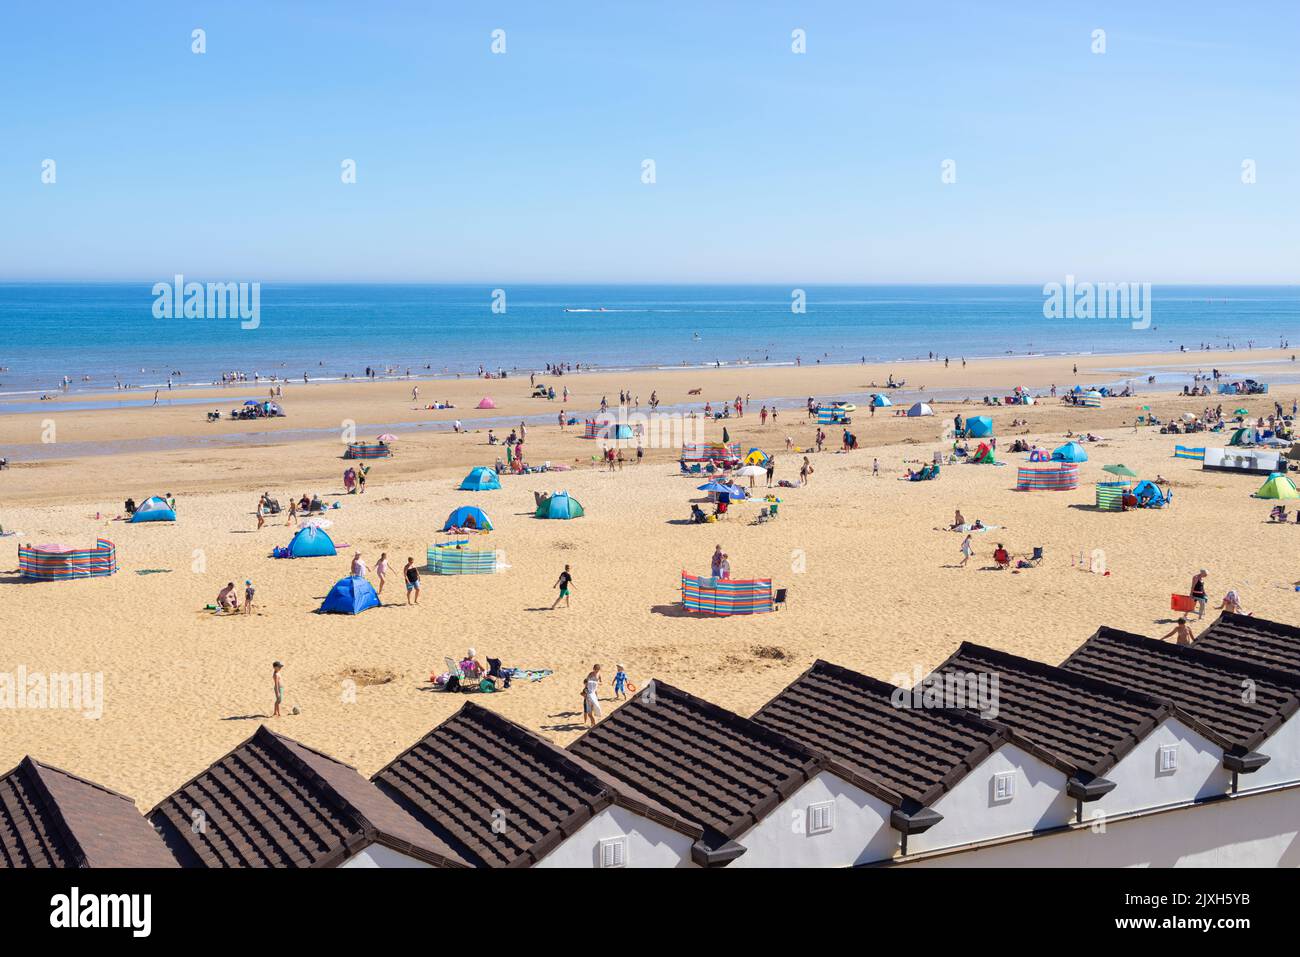 Bridlington South Beach beach huts tourists holidaymakers and people sunbathing on the beach Bridlington East Riding of Yorkshire England UK GB Europe Stock Photo